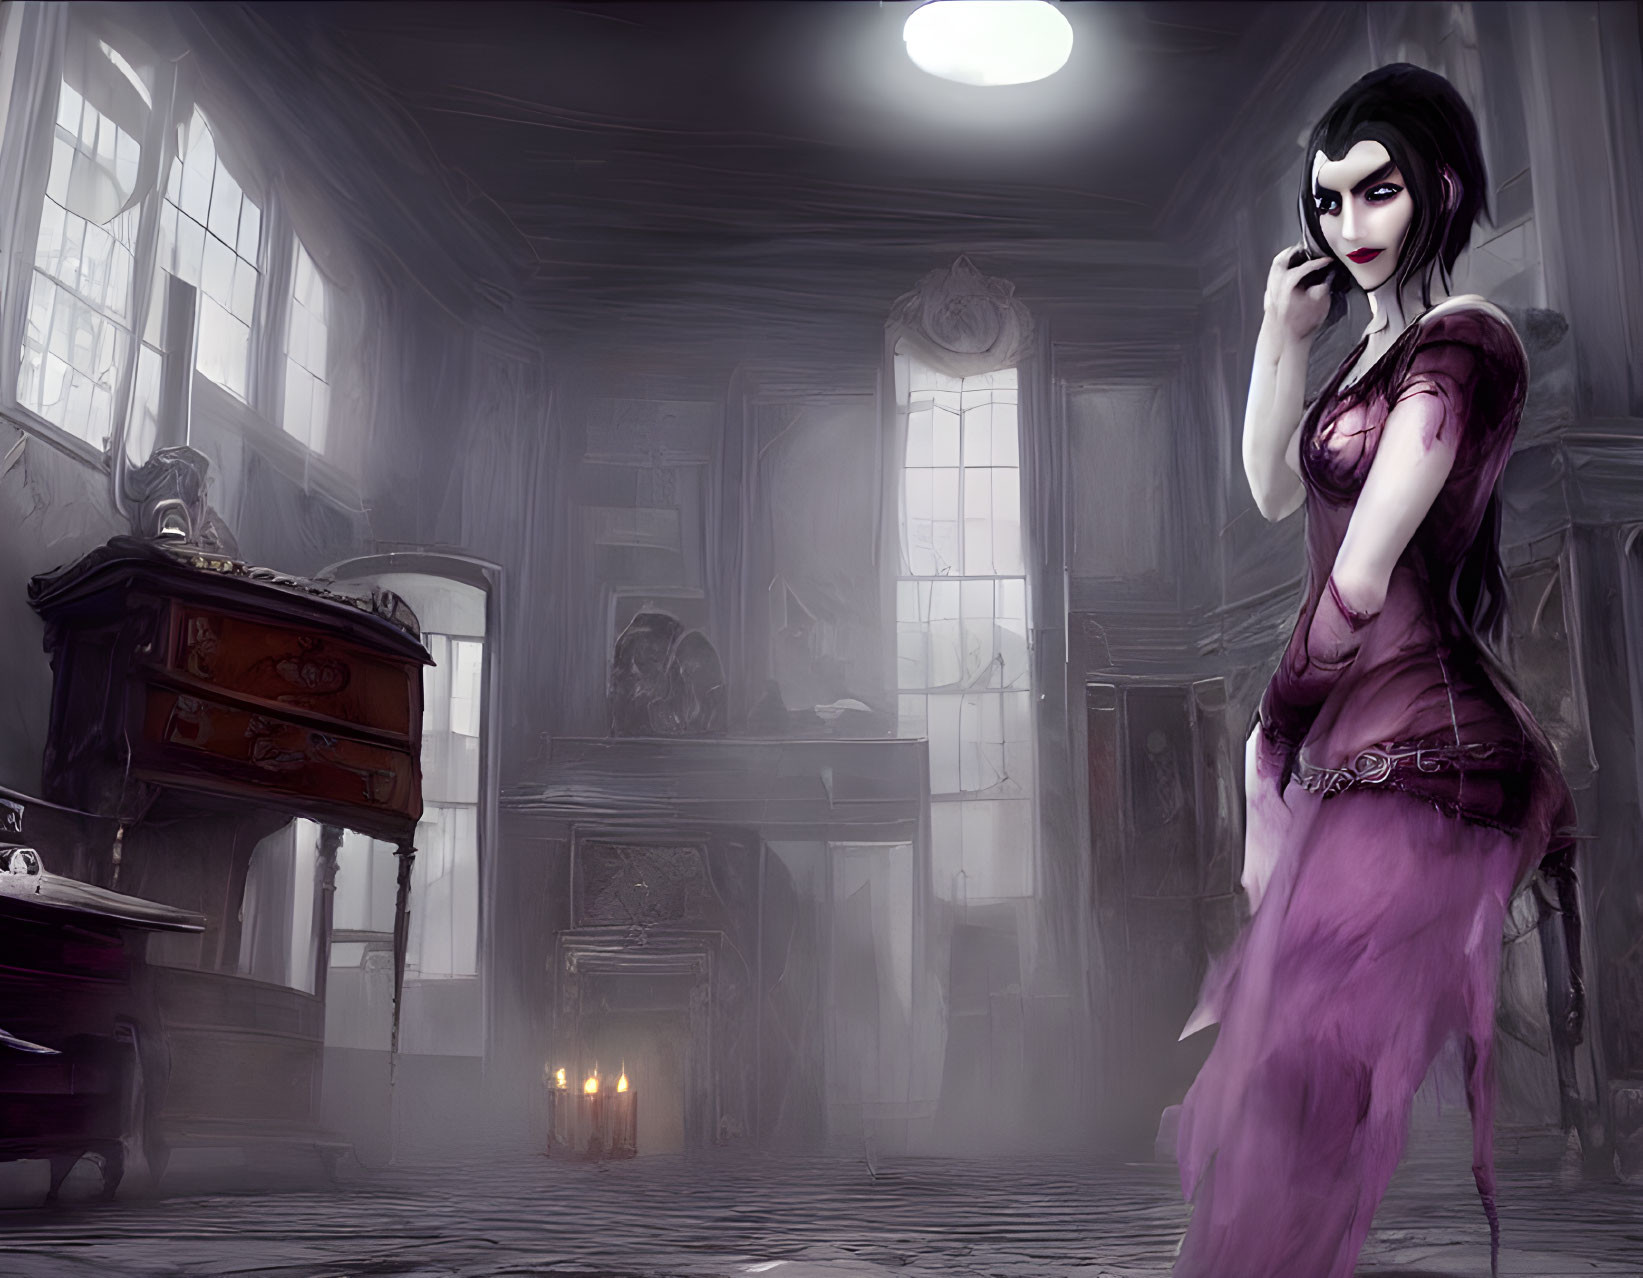 Gothic-style illustration of pale woman in dim, candlelit room